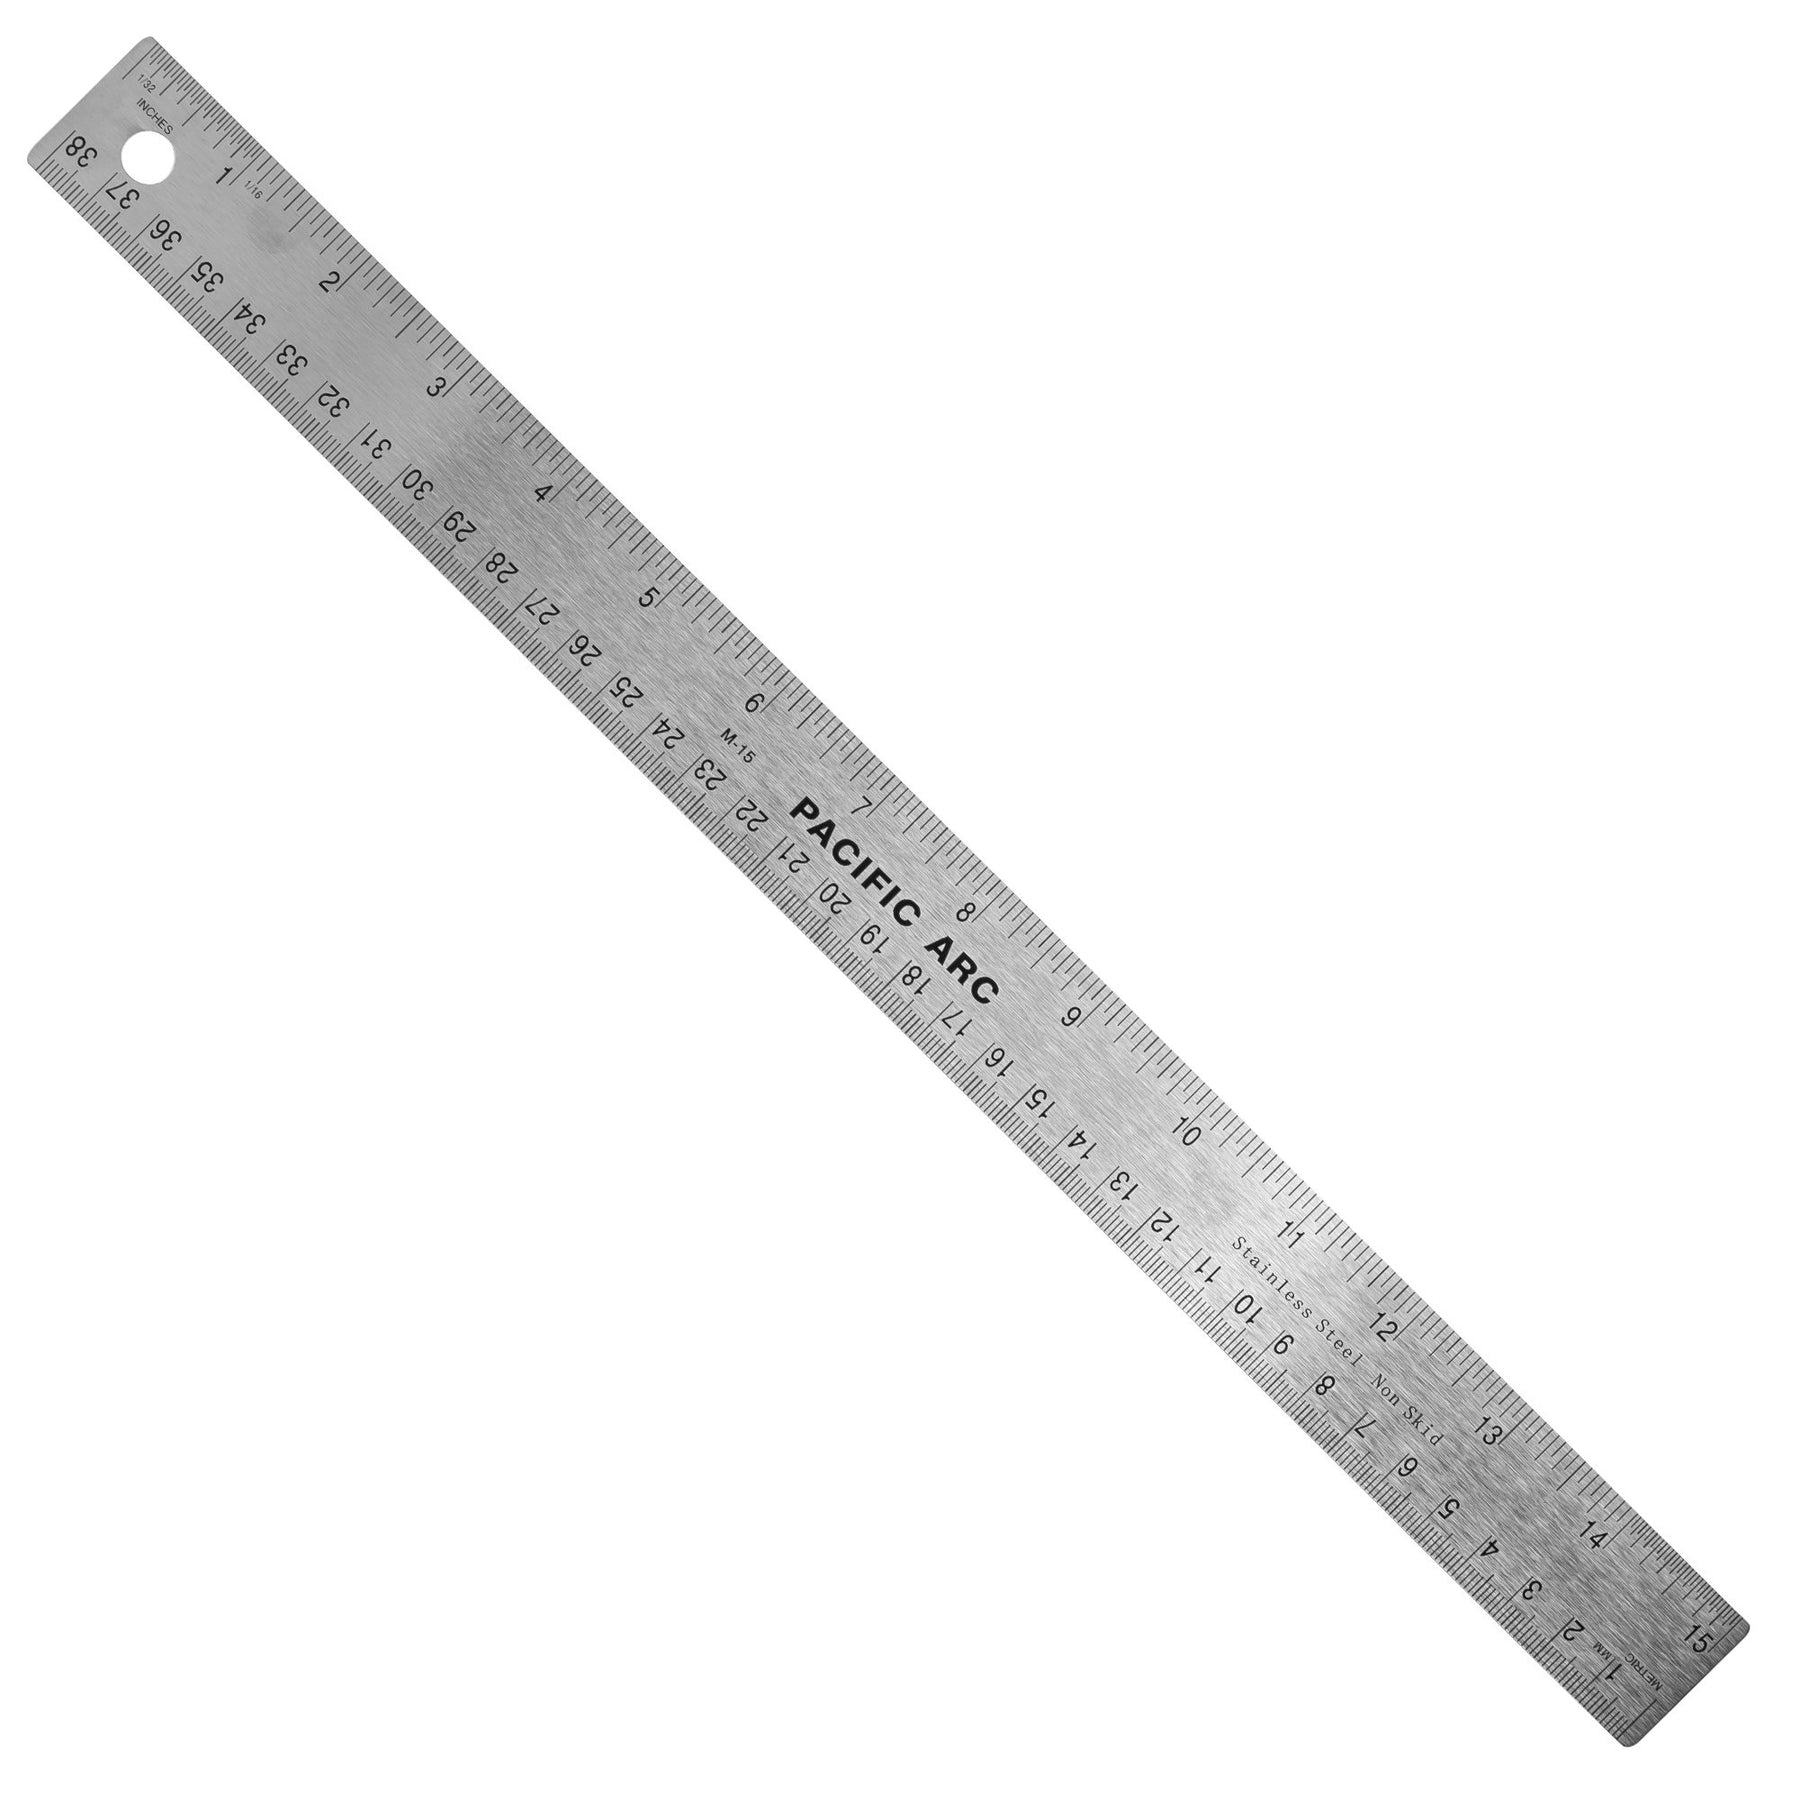 Pacific Arc Stainless Steel 6 Inch Metal Ruler Non-Slip Cork Back, with  Inch and Metric Graduations - 038236018049